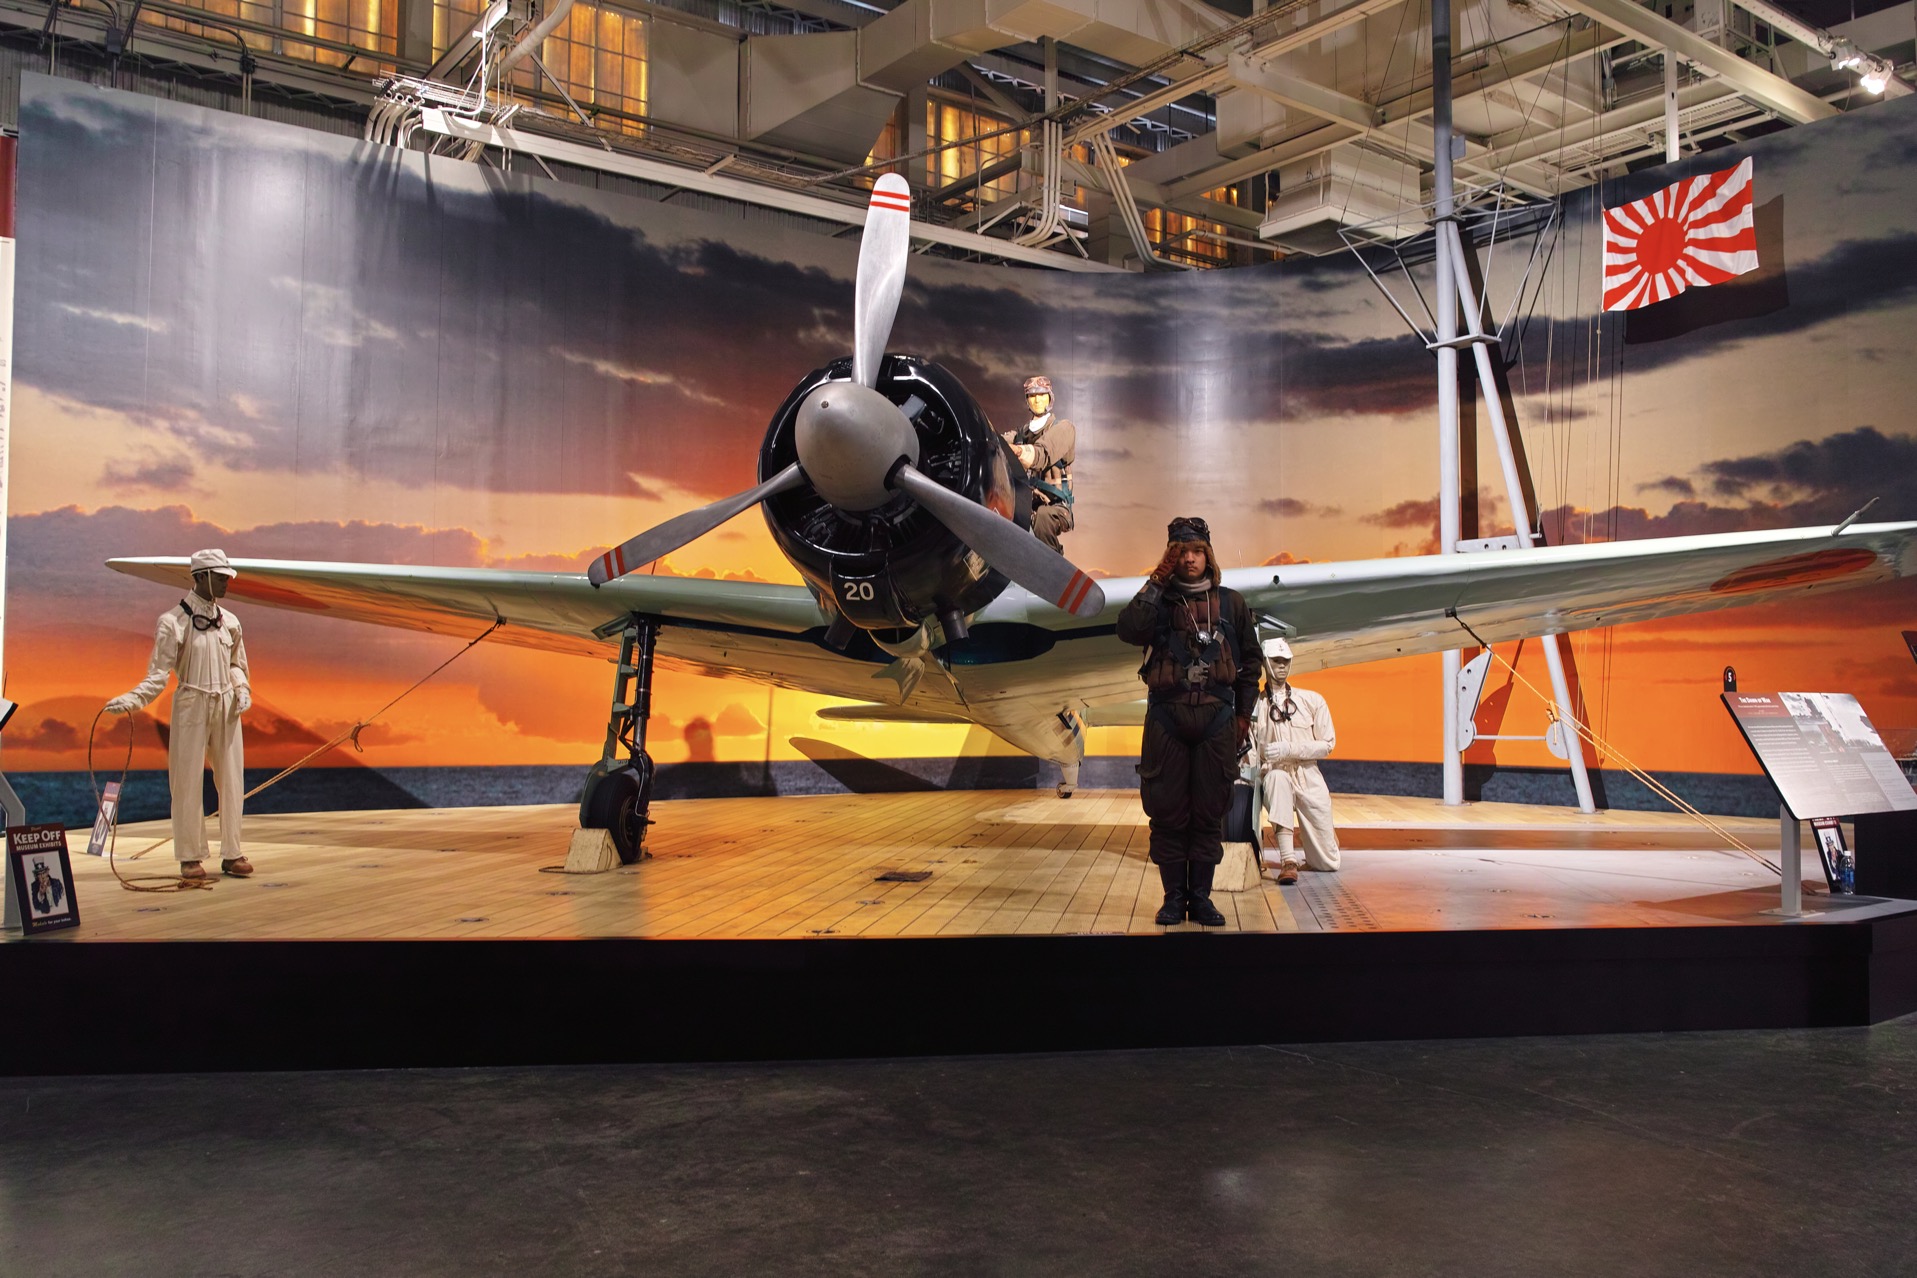 Discover Historic Planes At Pearl Harbor Aviation Museum